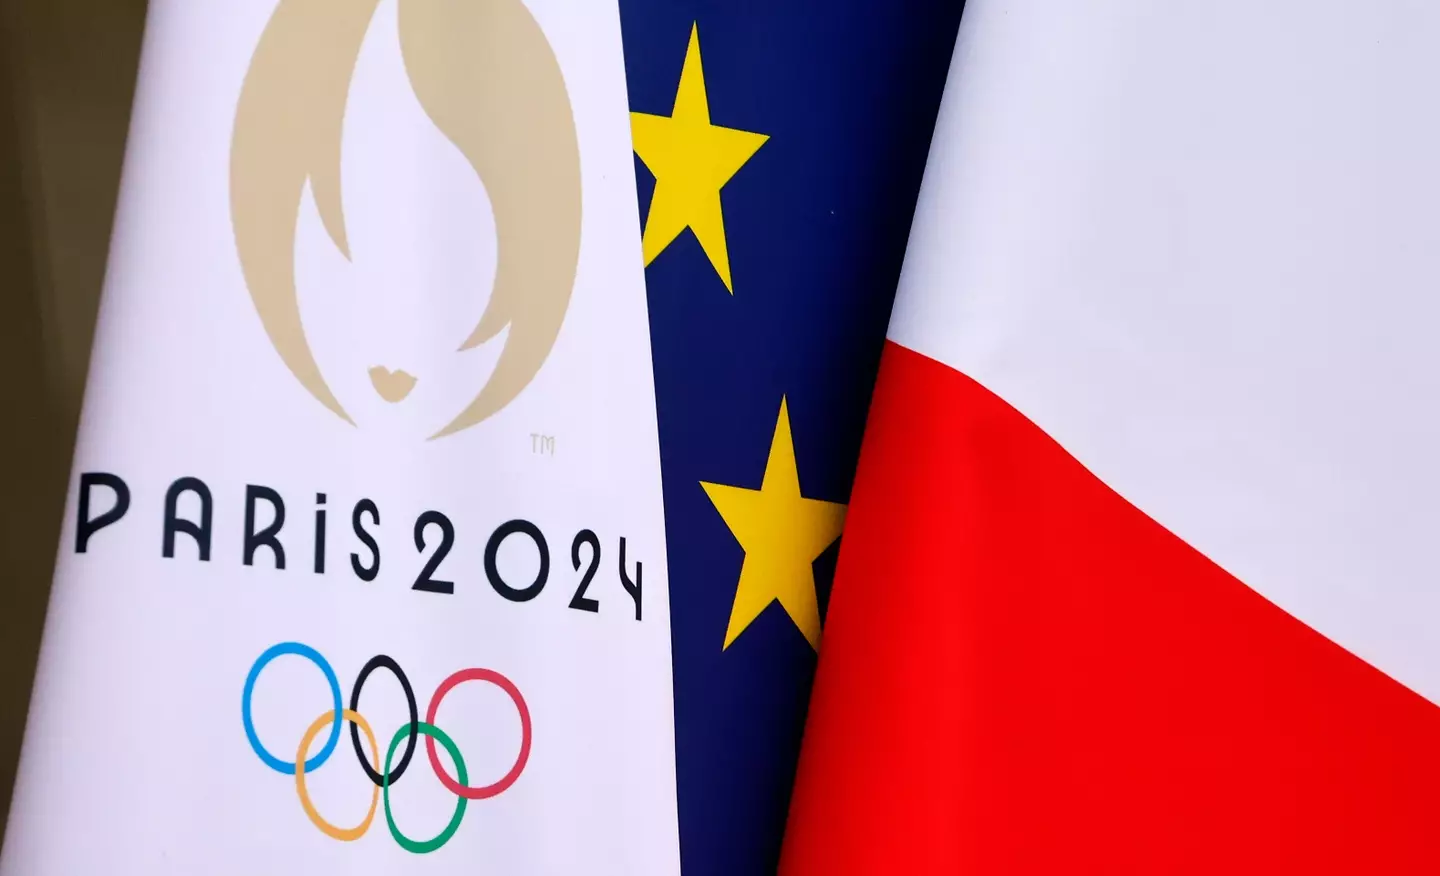 The 2024 Olympics are being hosted in Paris.